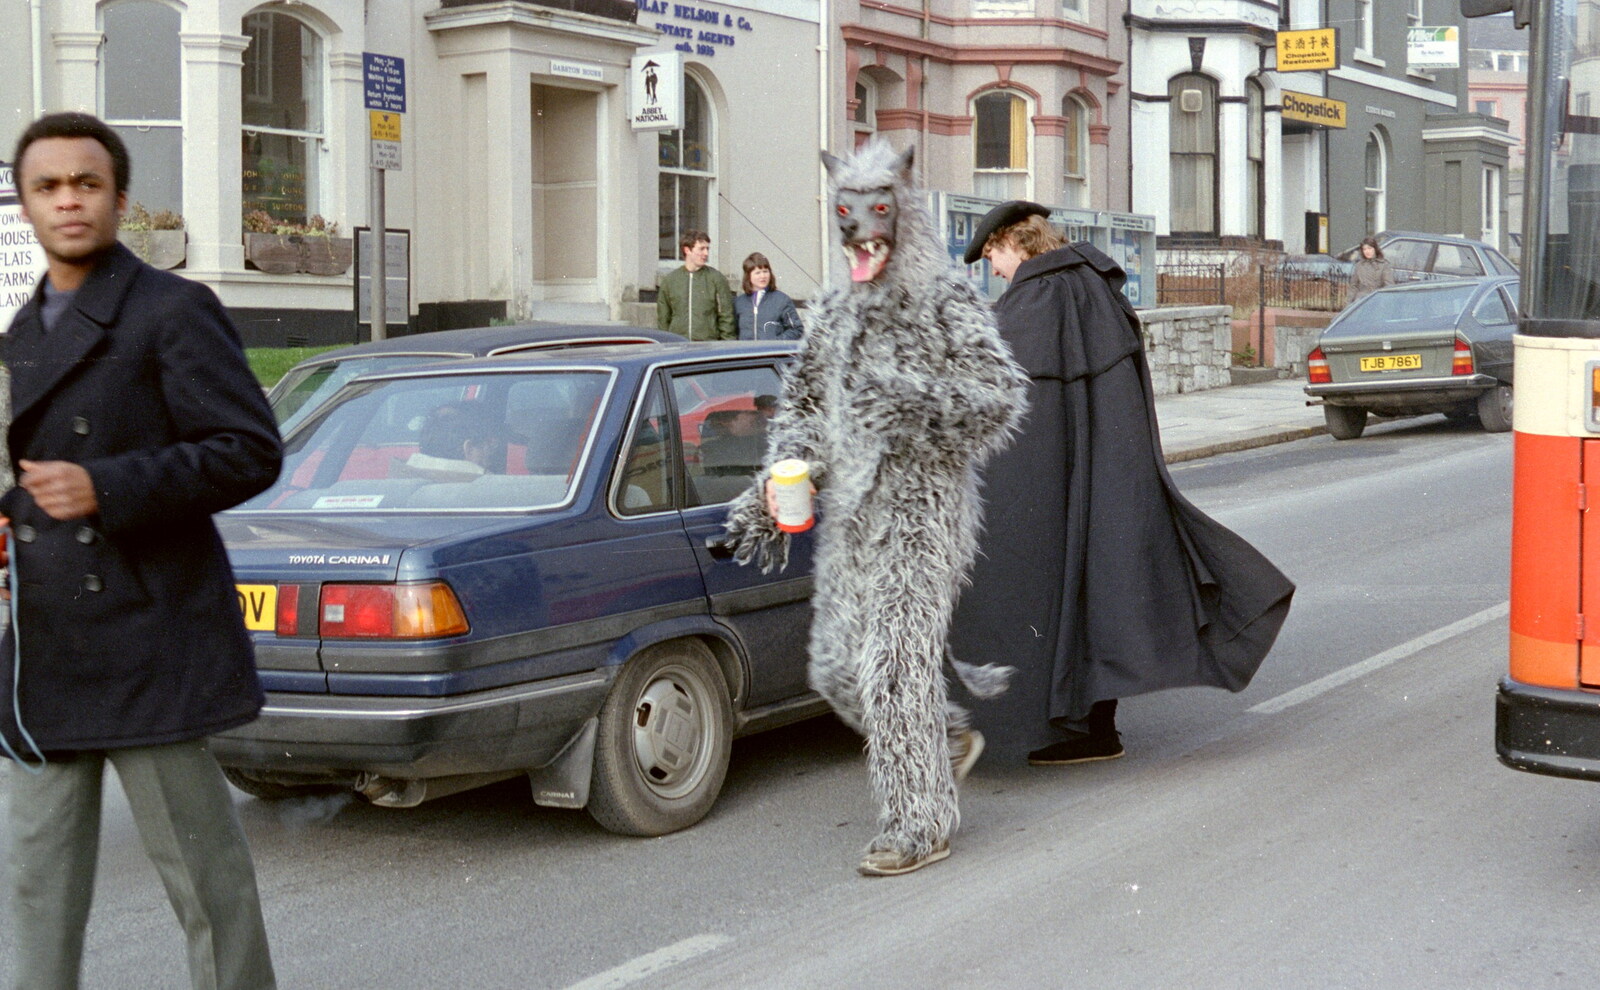 A highwayman holds up a car on North Hill from Uni: PPSU "Jazz" RAG Street Parade, Plymouth, Devon - 17th February 1986